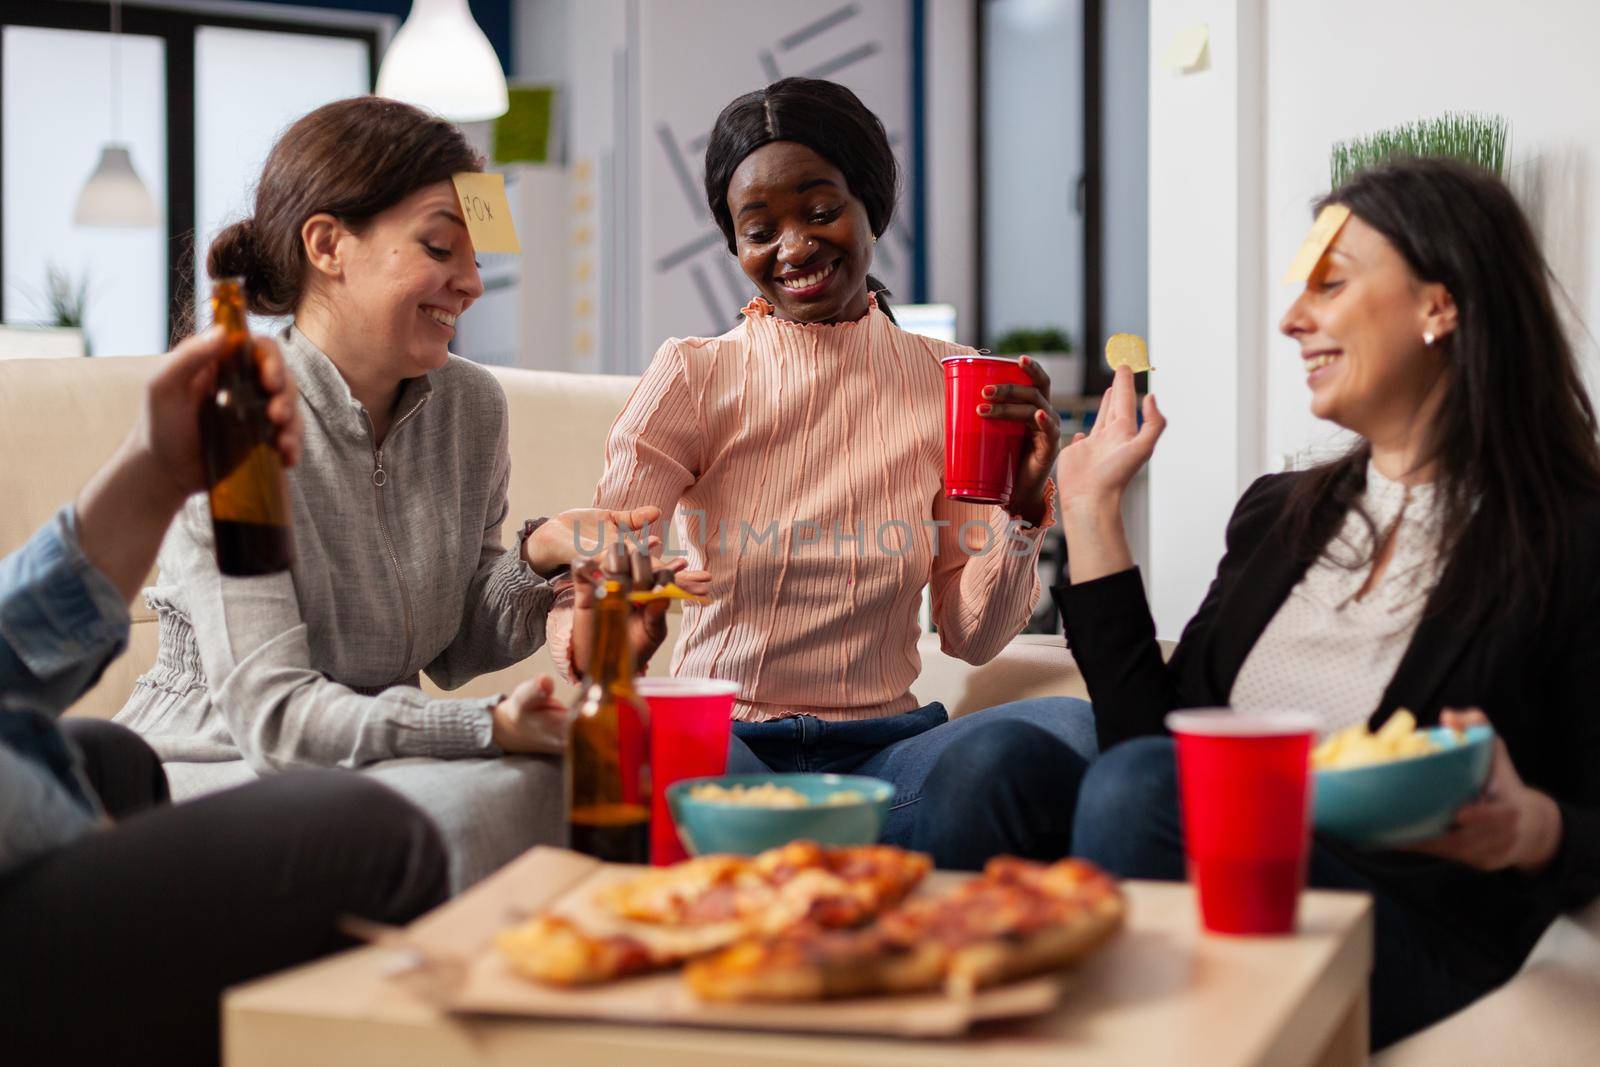 Diverse team of colleagues play game of guessing after work at office while sitting on couch. African american woman doing impersonation for fun cheerful activity entertainment enjoyment